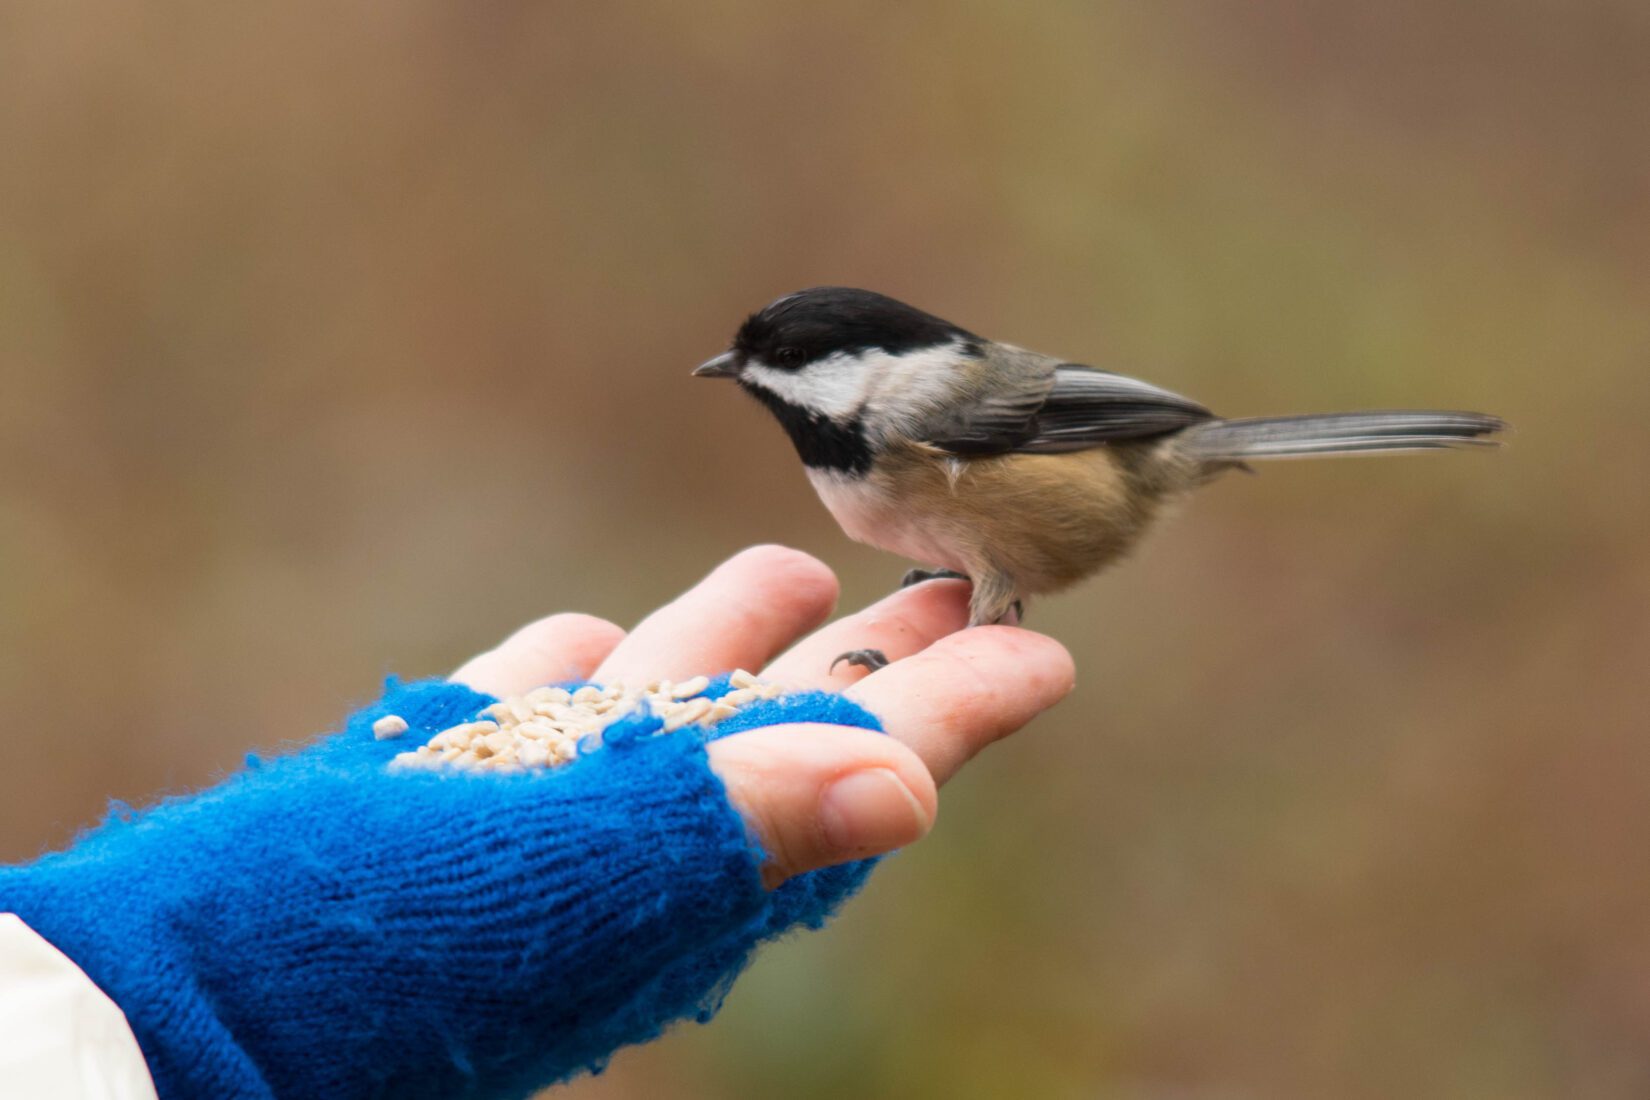 Black-capped chickadee eating seeds from hand